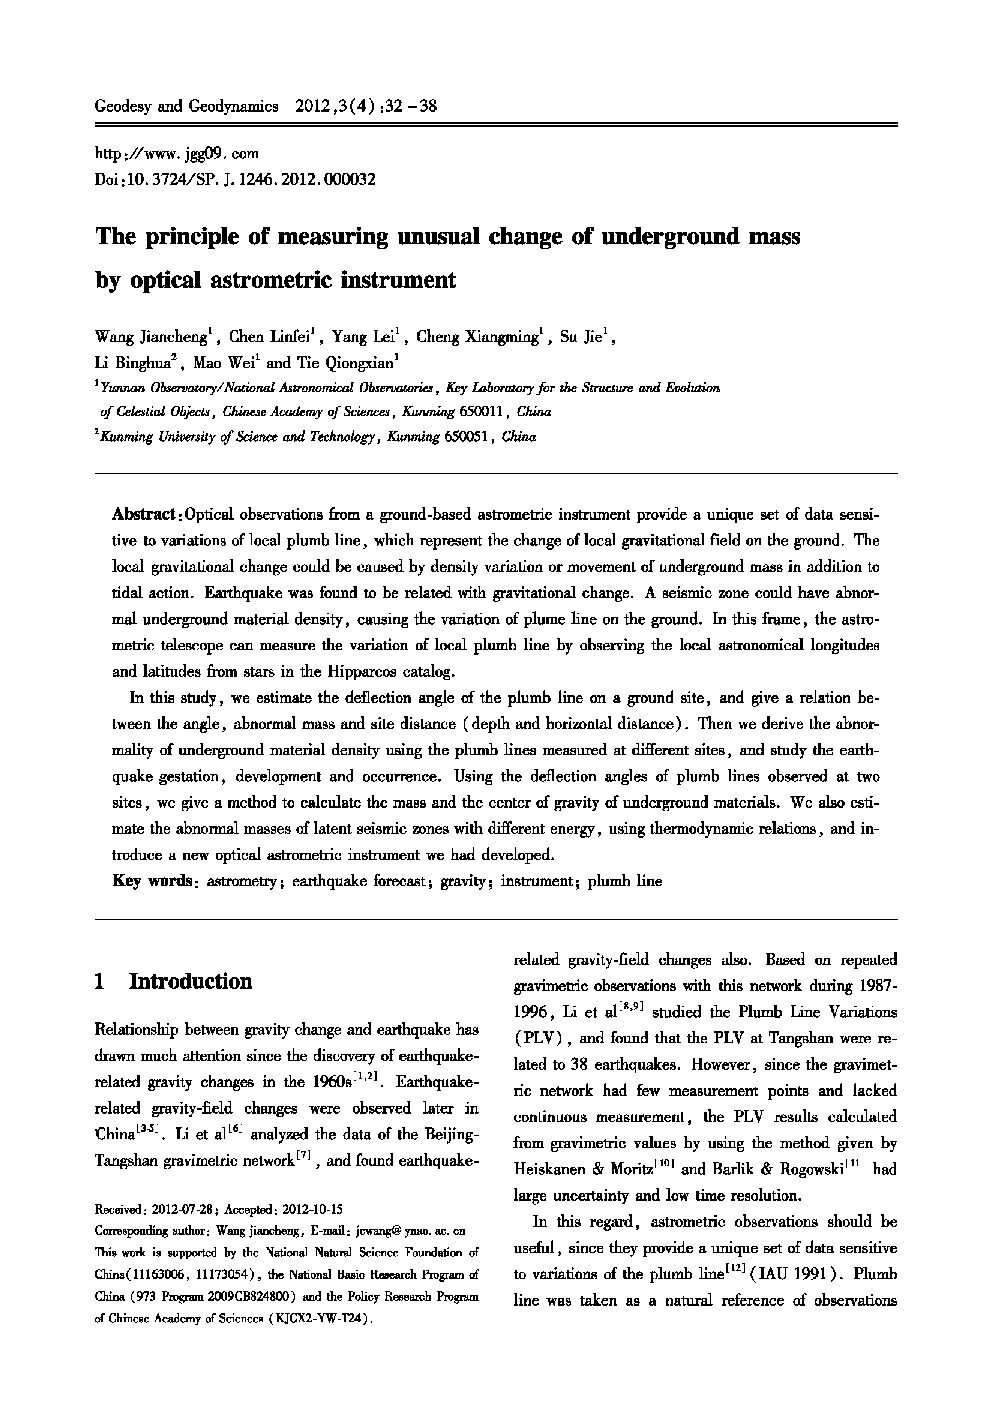 The principle of measuring unusual change of underground mass by optical astrometric instrument 